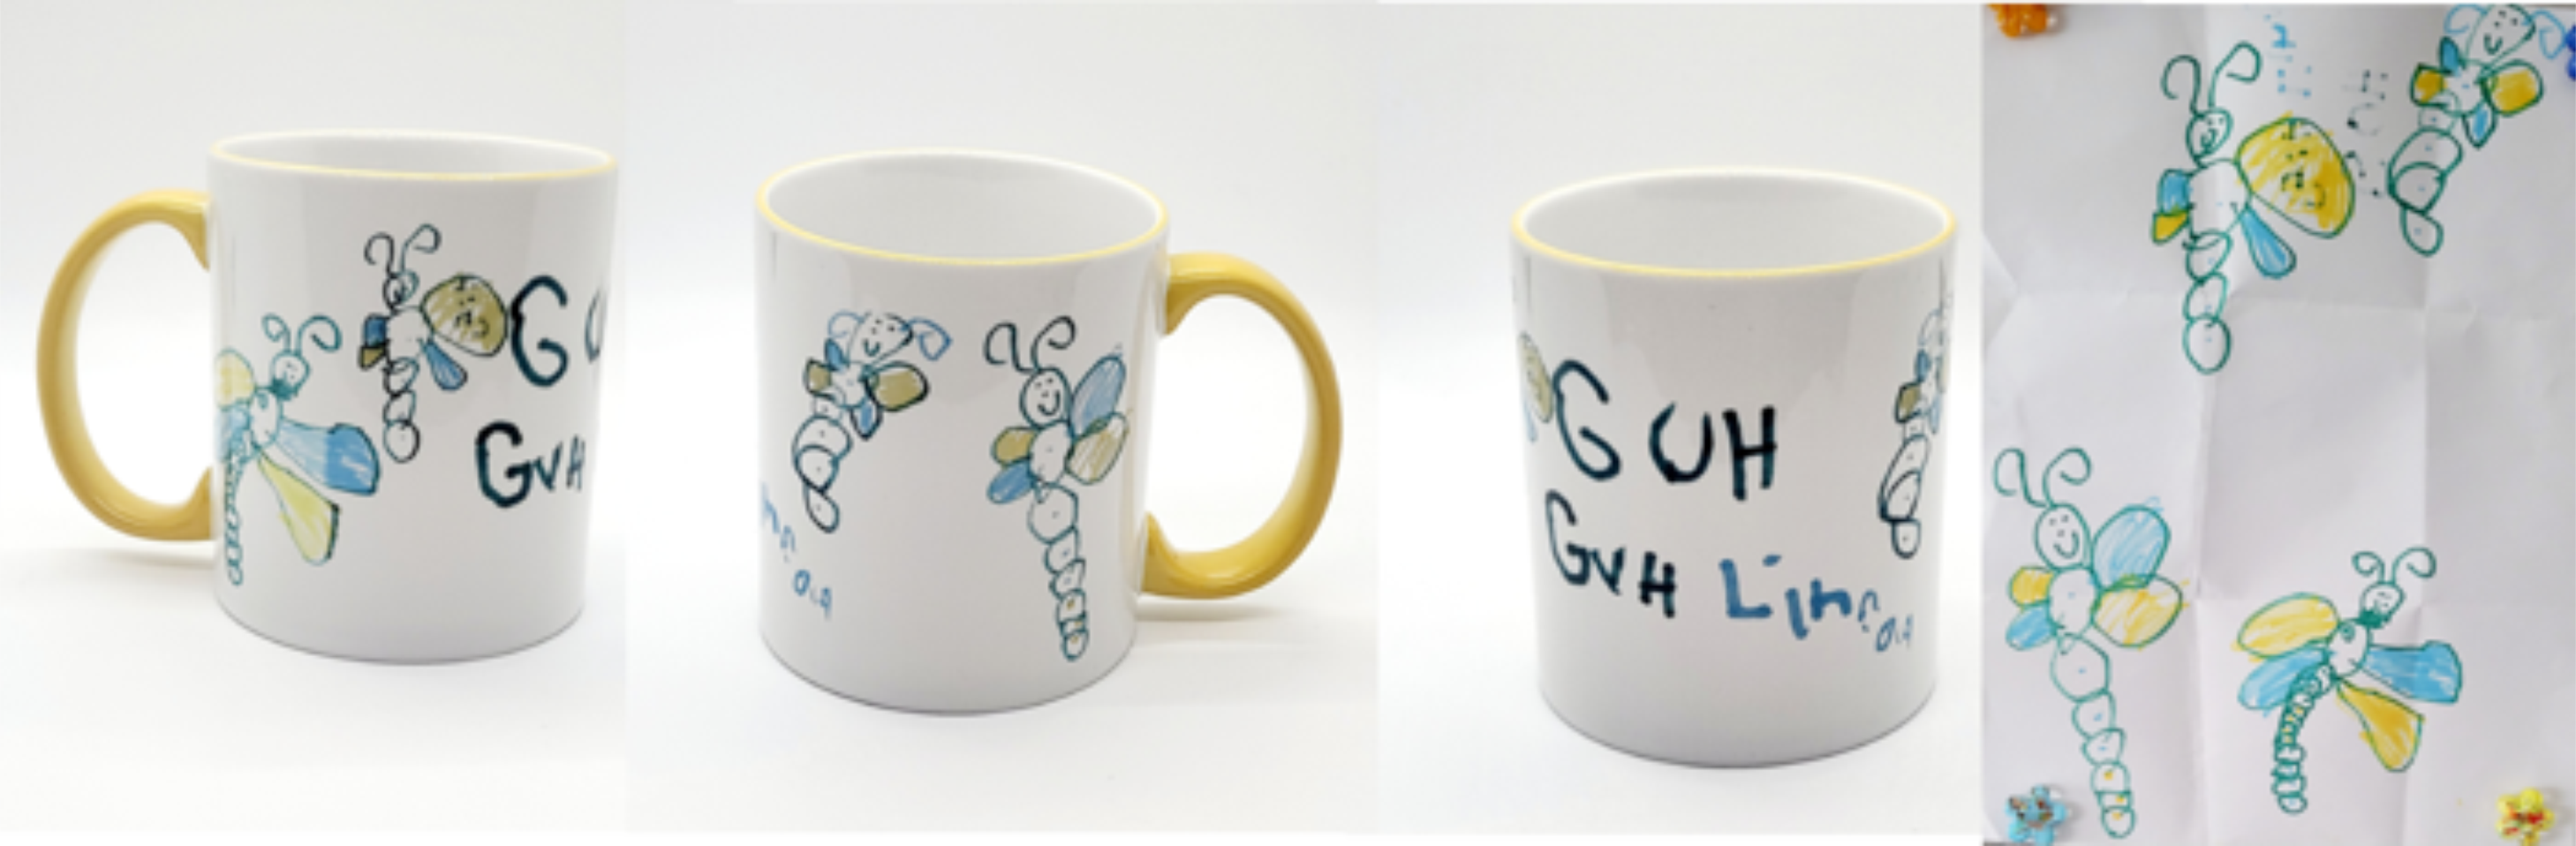 Lincoln's artwork for Guh Guh on my mug (quarterly contest) made with sublimation printing